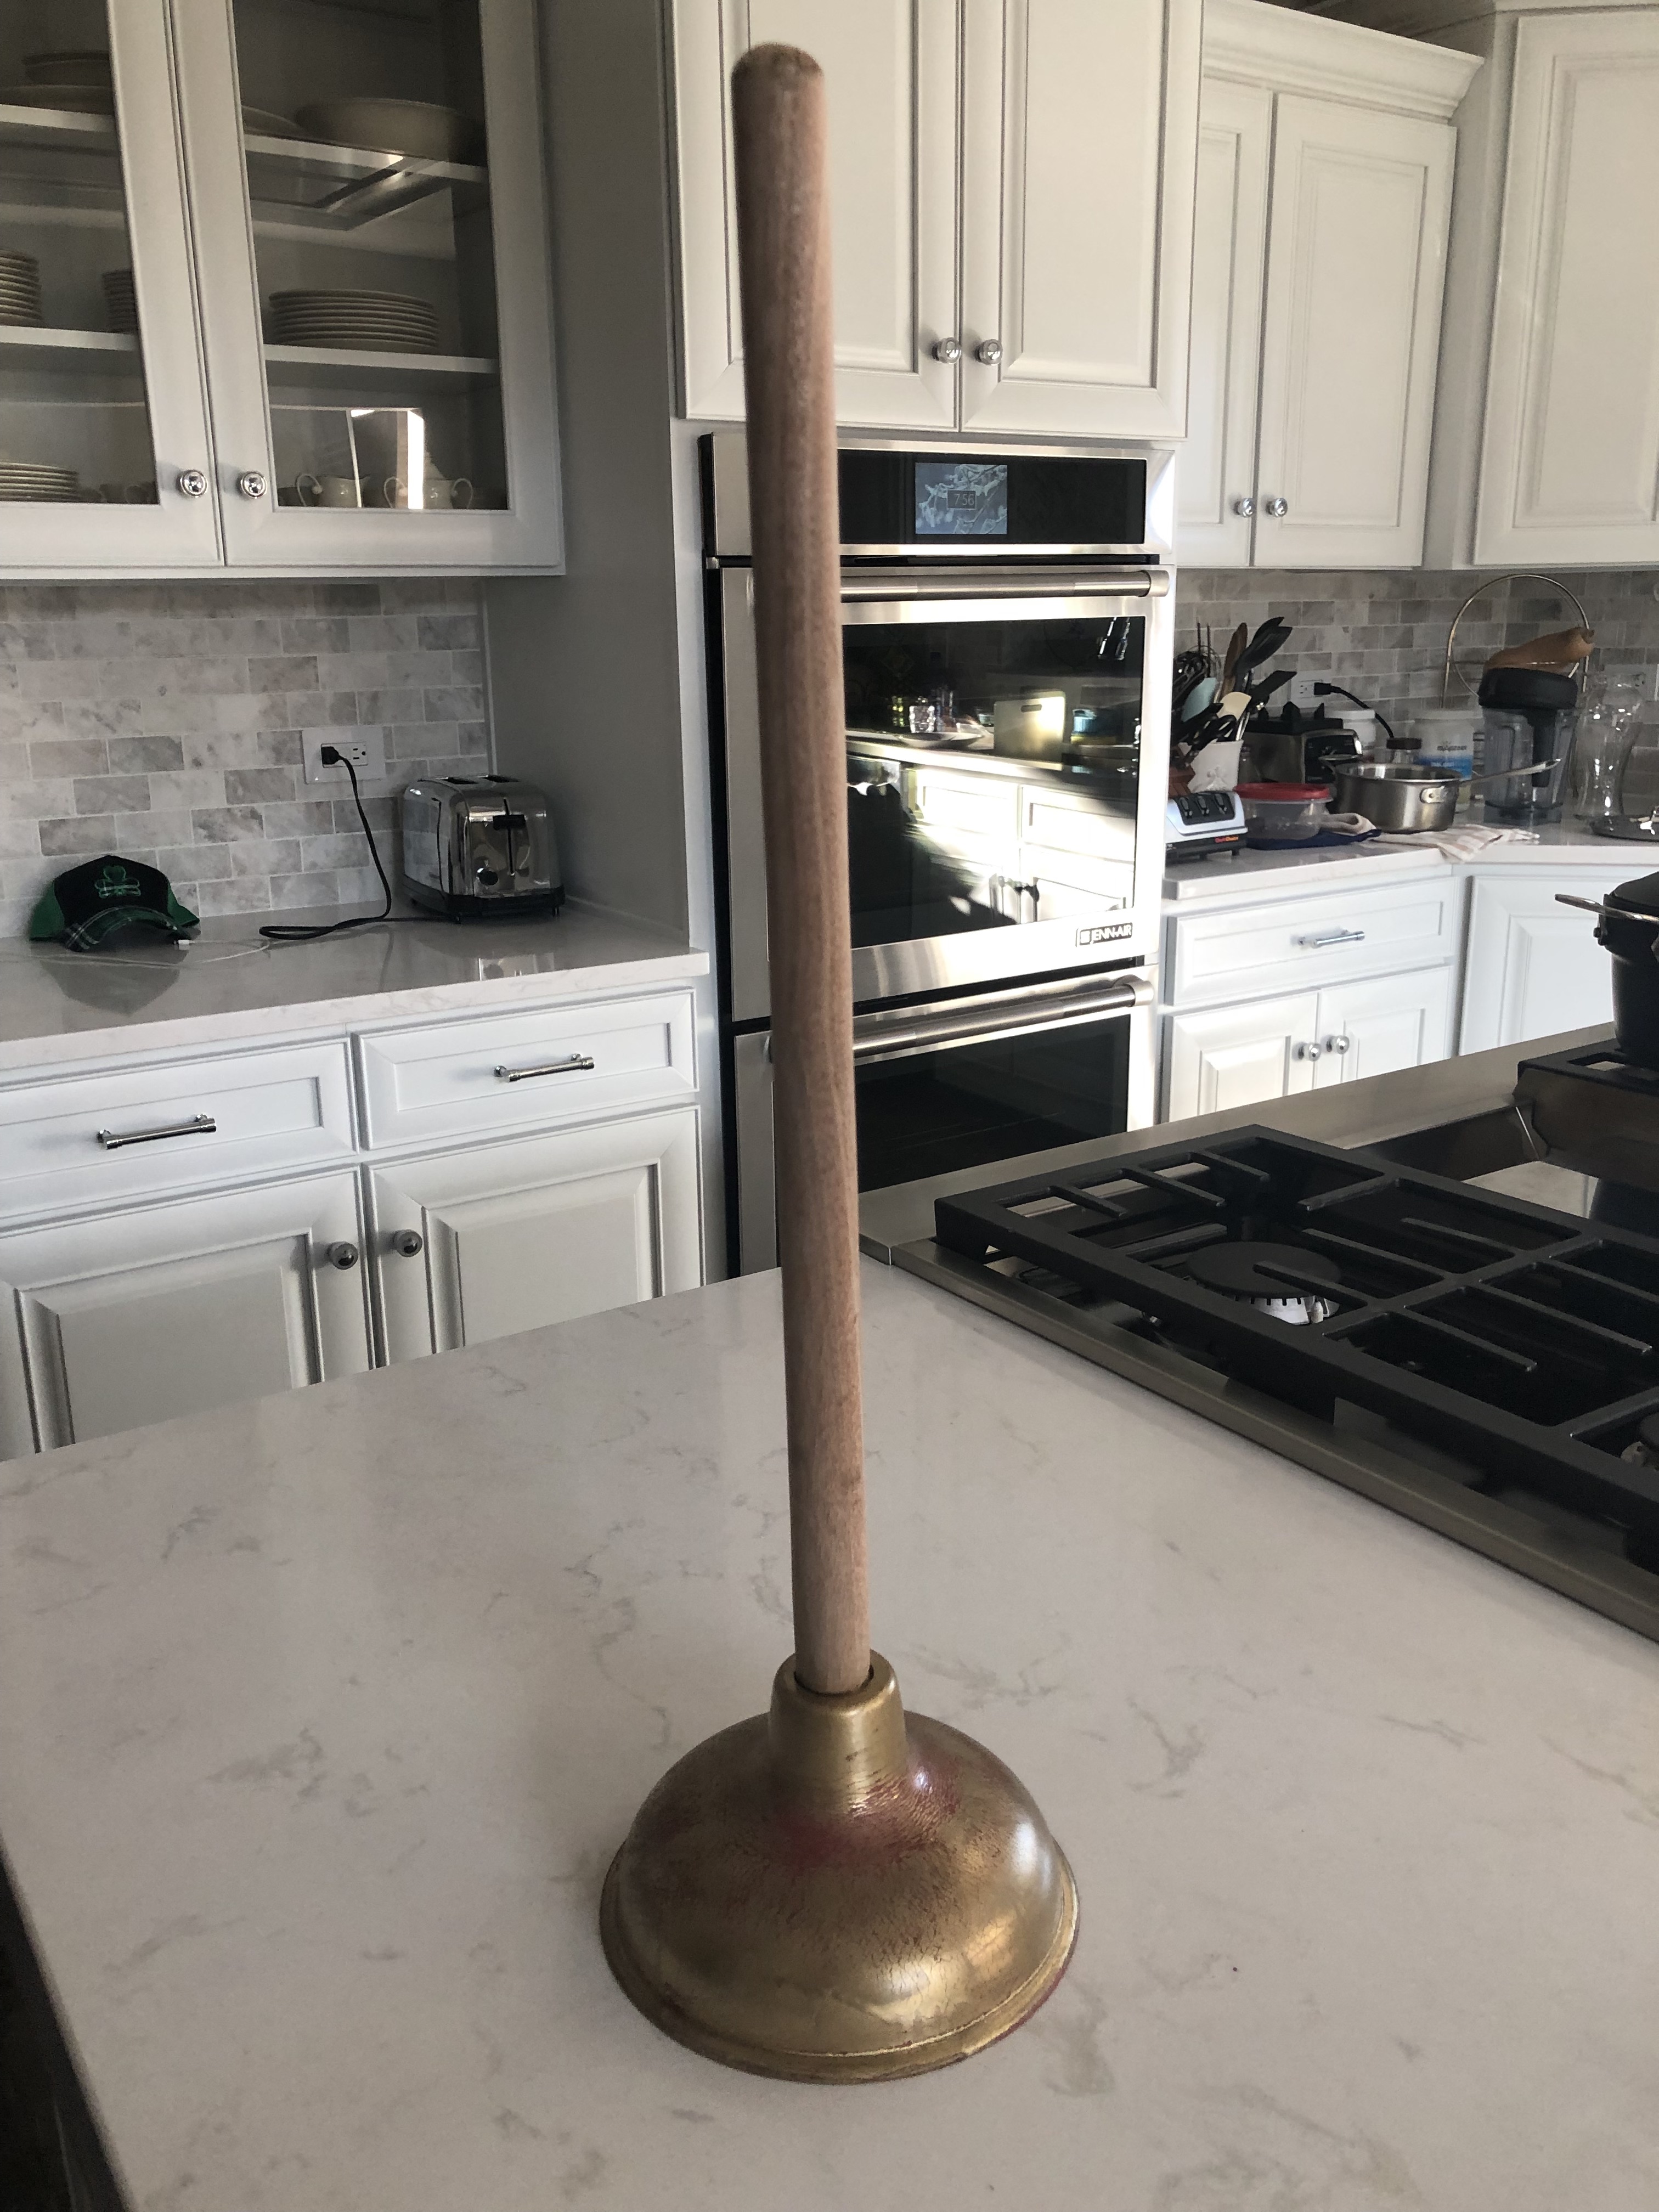 The coveted Golden Plunger